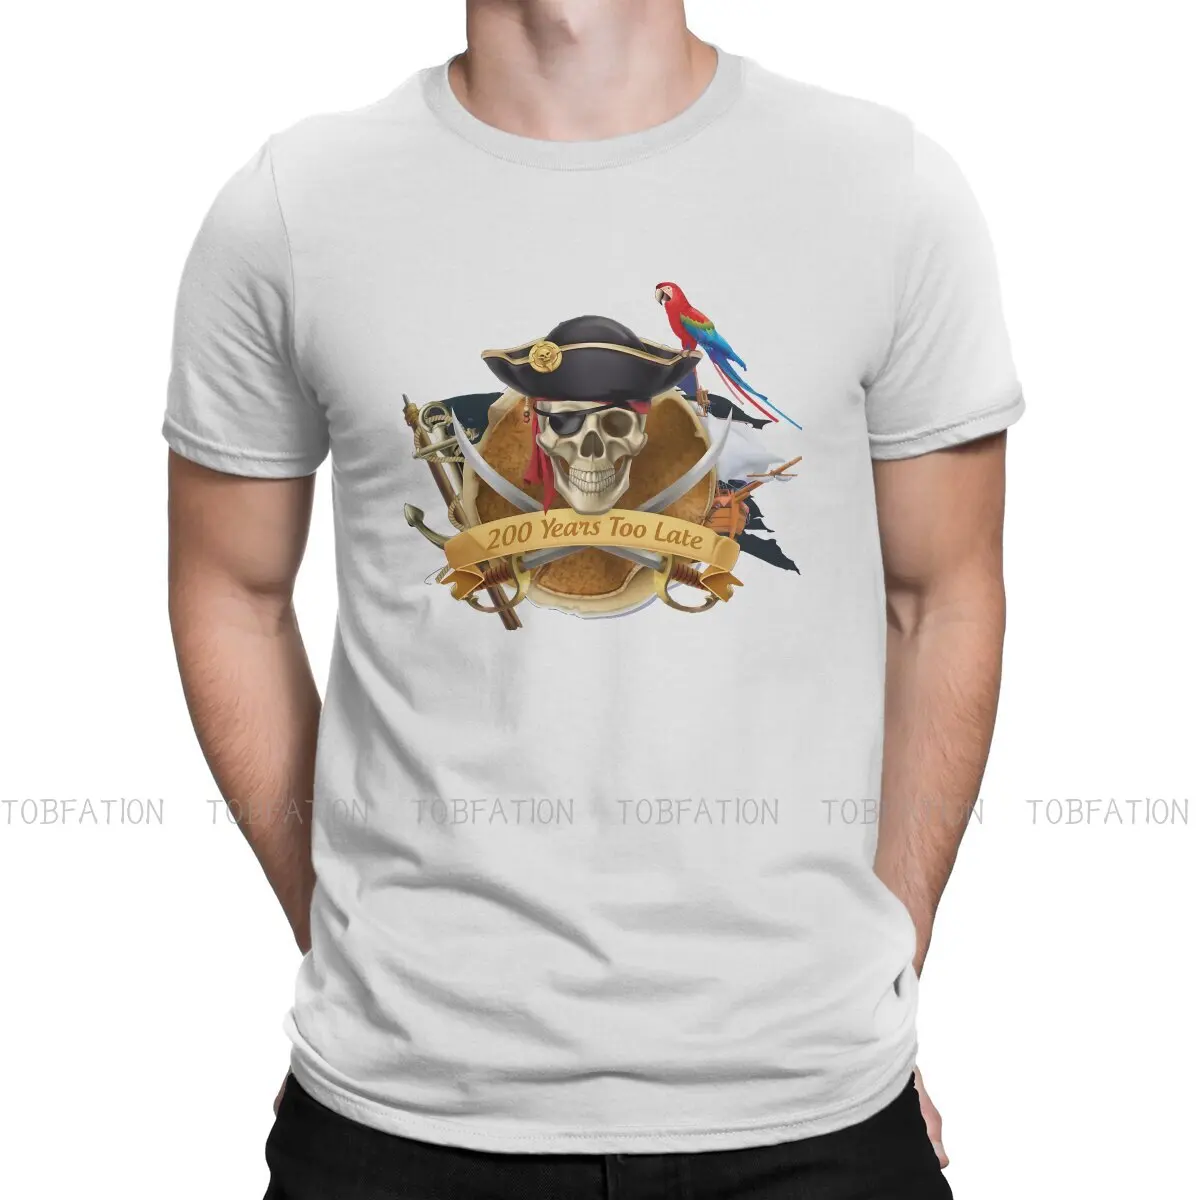 

Parrot Animal Original TShirts A Pirate's Life Classic Distinctive Homme T Shirt Hipster Tops Size S-6XL